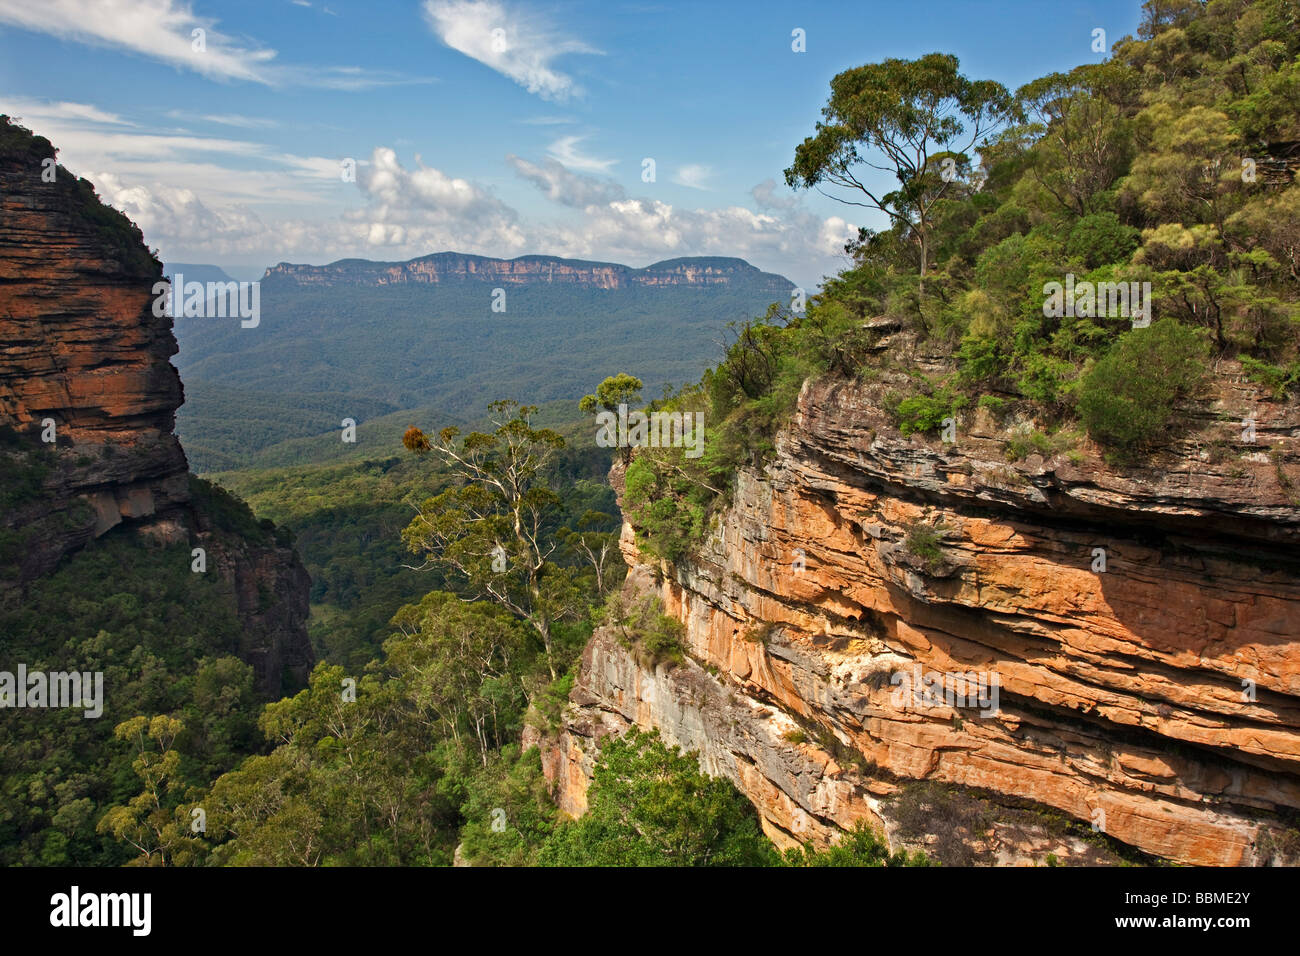 Australia New South Wales. A view of the Jamison Valley in the Blue Mountains from Prince Henry Cliff Walk. Stock Photo